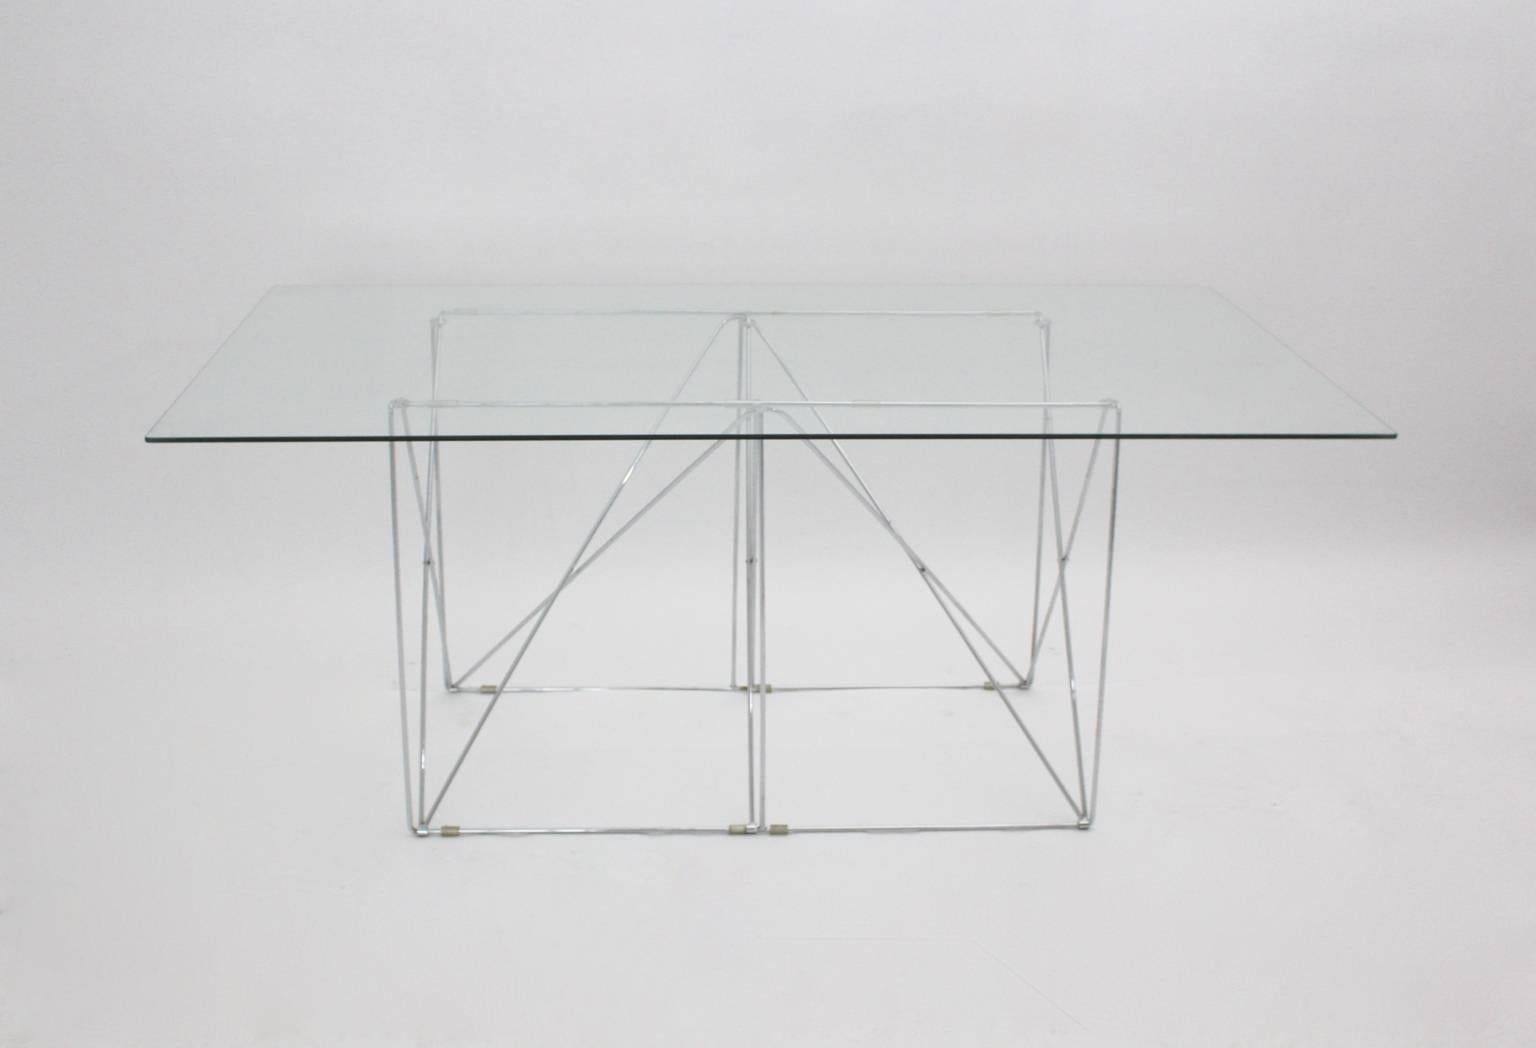 Mid Century Modern vintage dining table, which is a fantastic foldable chromed metal construction with a clear glass top (thickness 0.32 in = 0.8 cm).
This minimalistic Desk or Dining Table was designed by Max Sauze, circa 1970.

Very good condition